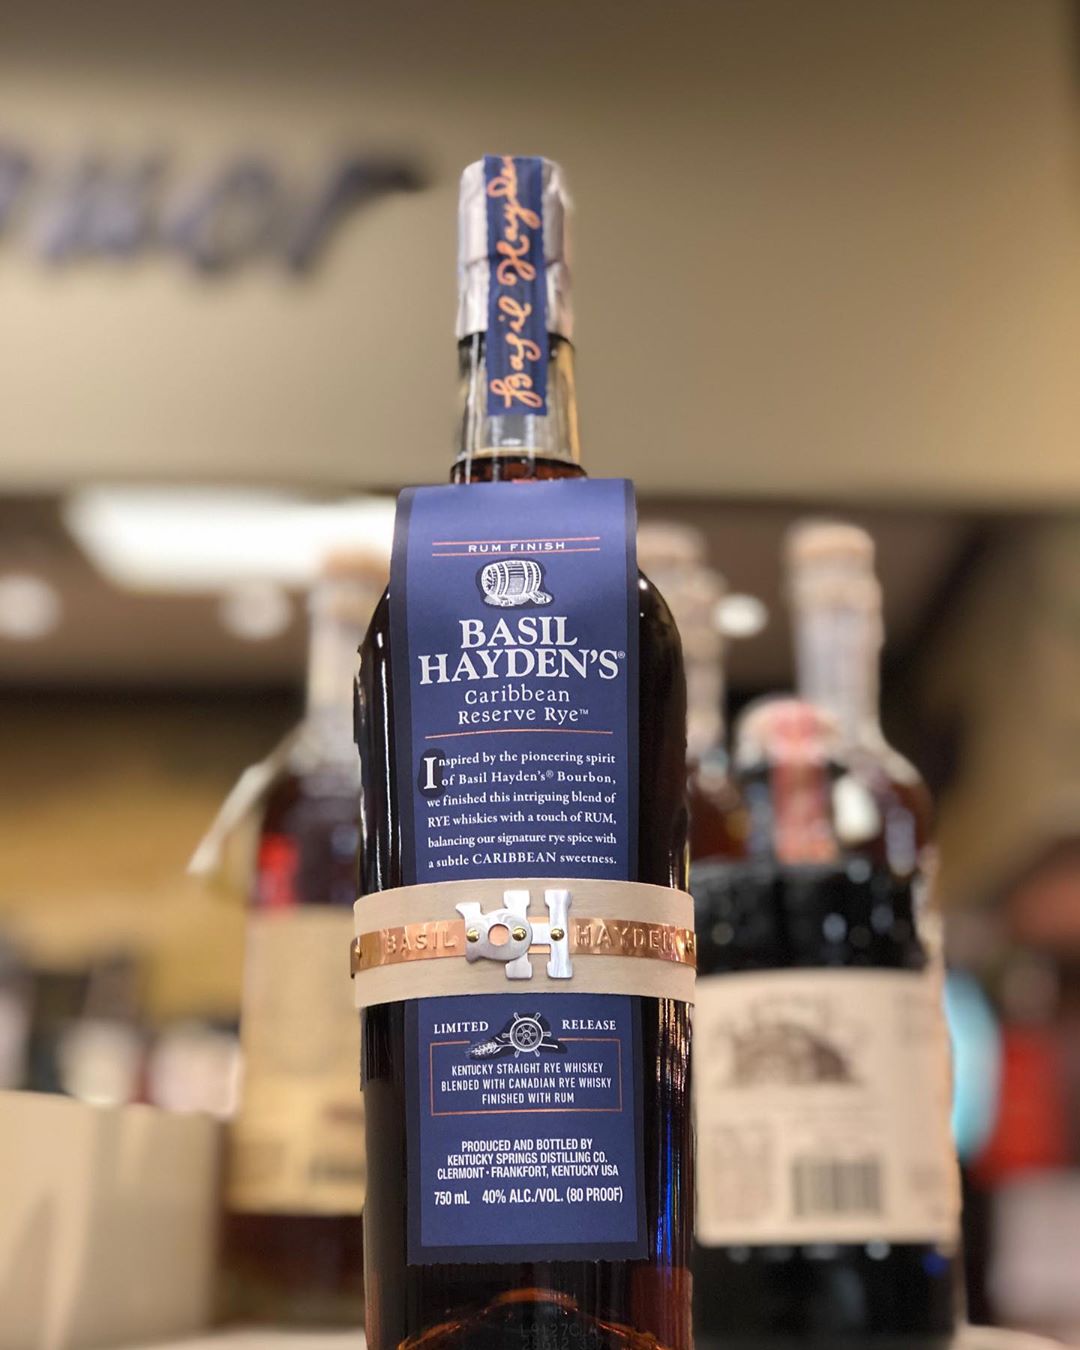 Rum Finished @basilhaydens is now in stock at our Perkins Rd location! #whiskey #liquor #rum…